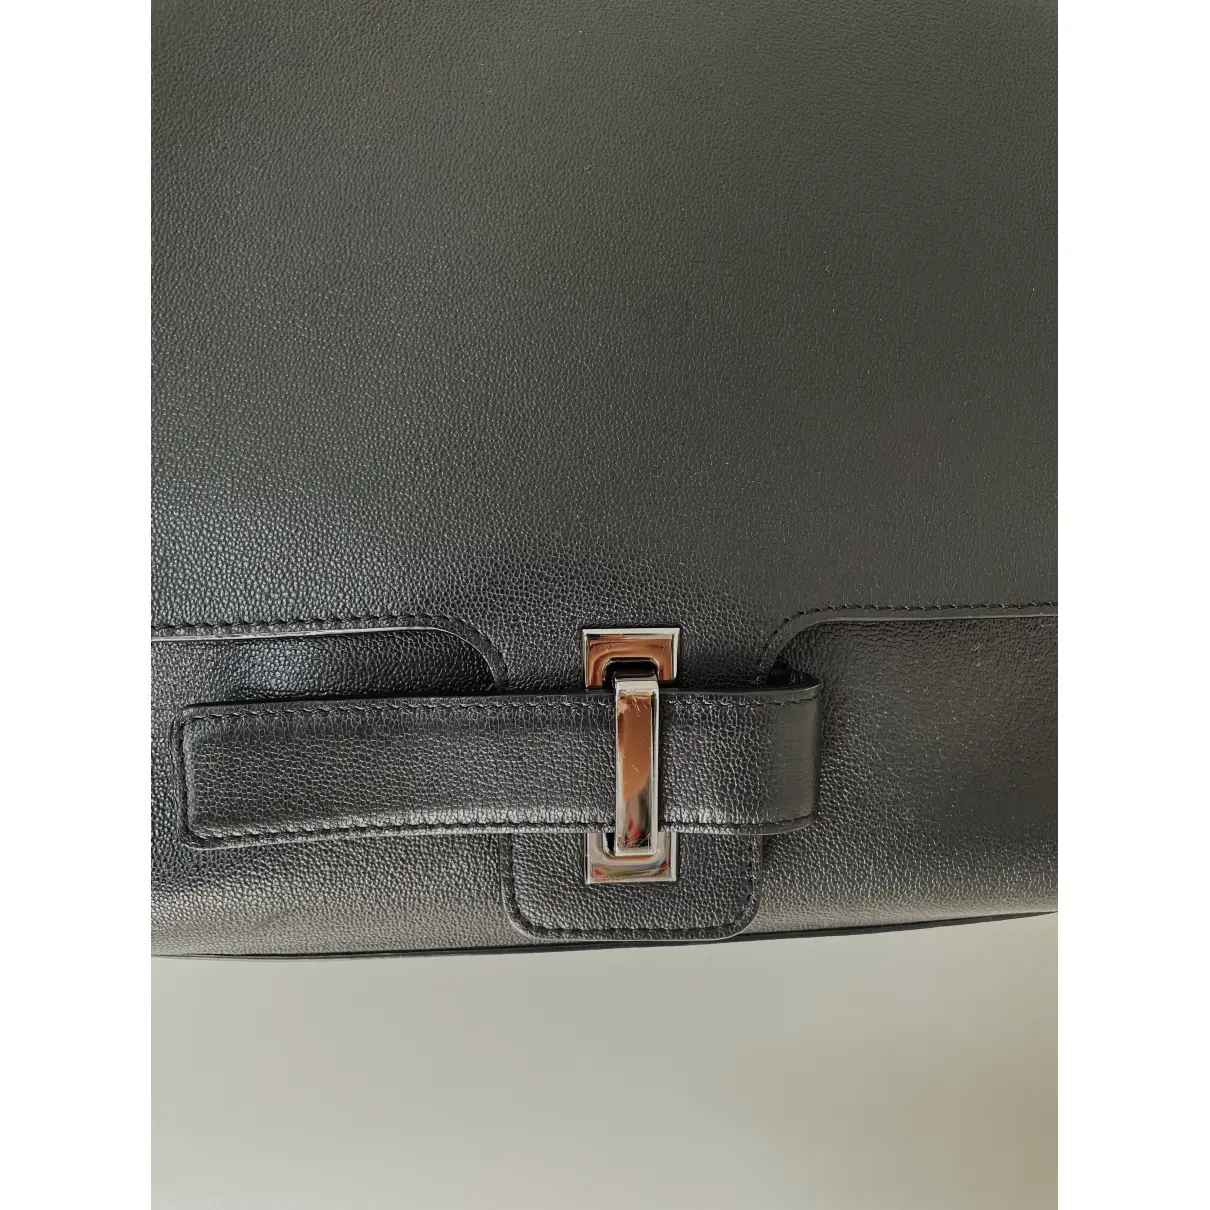 Leather bag Delvaux